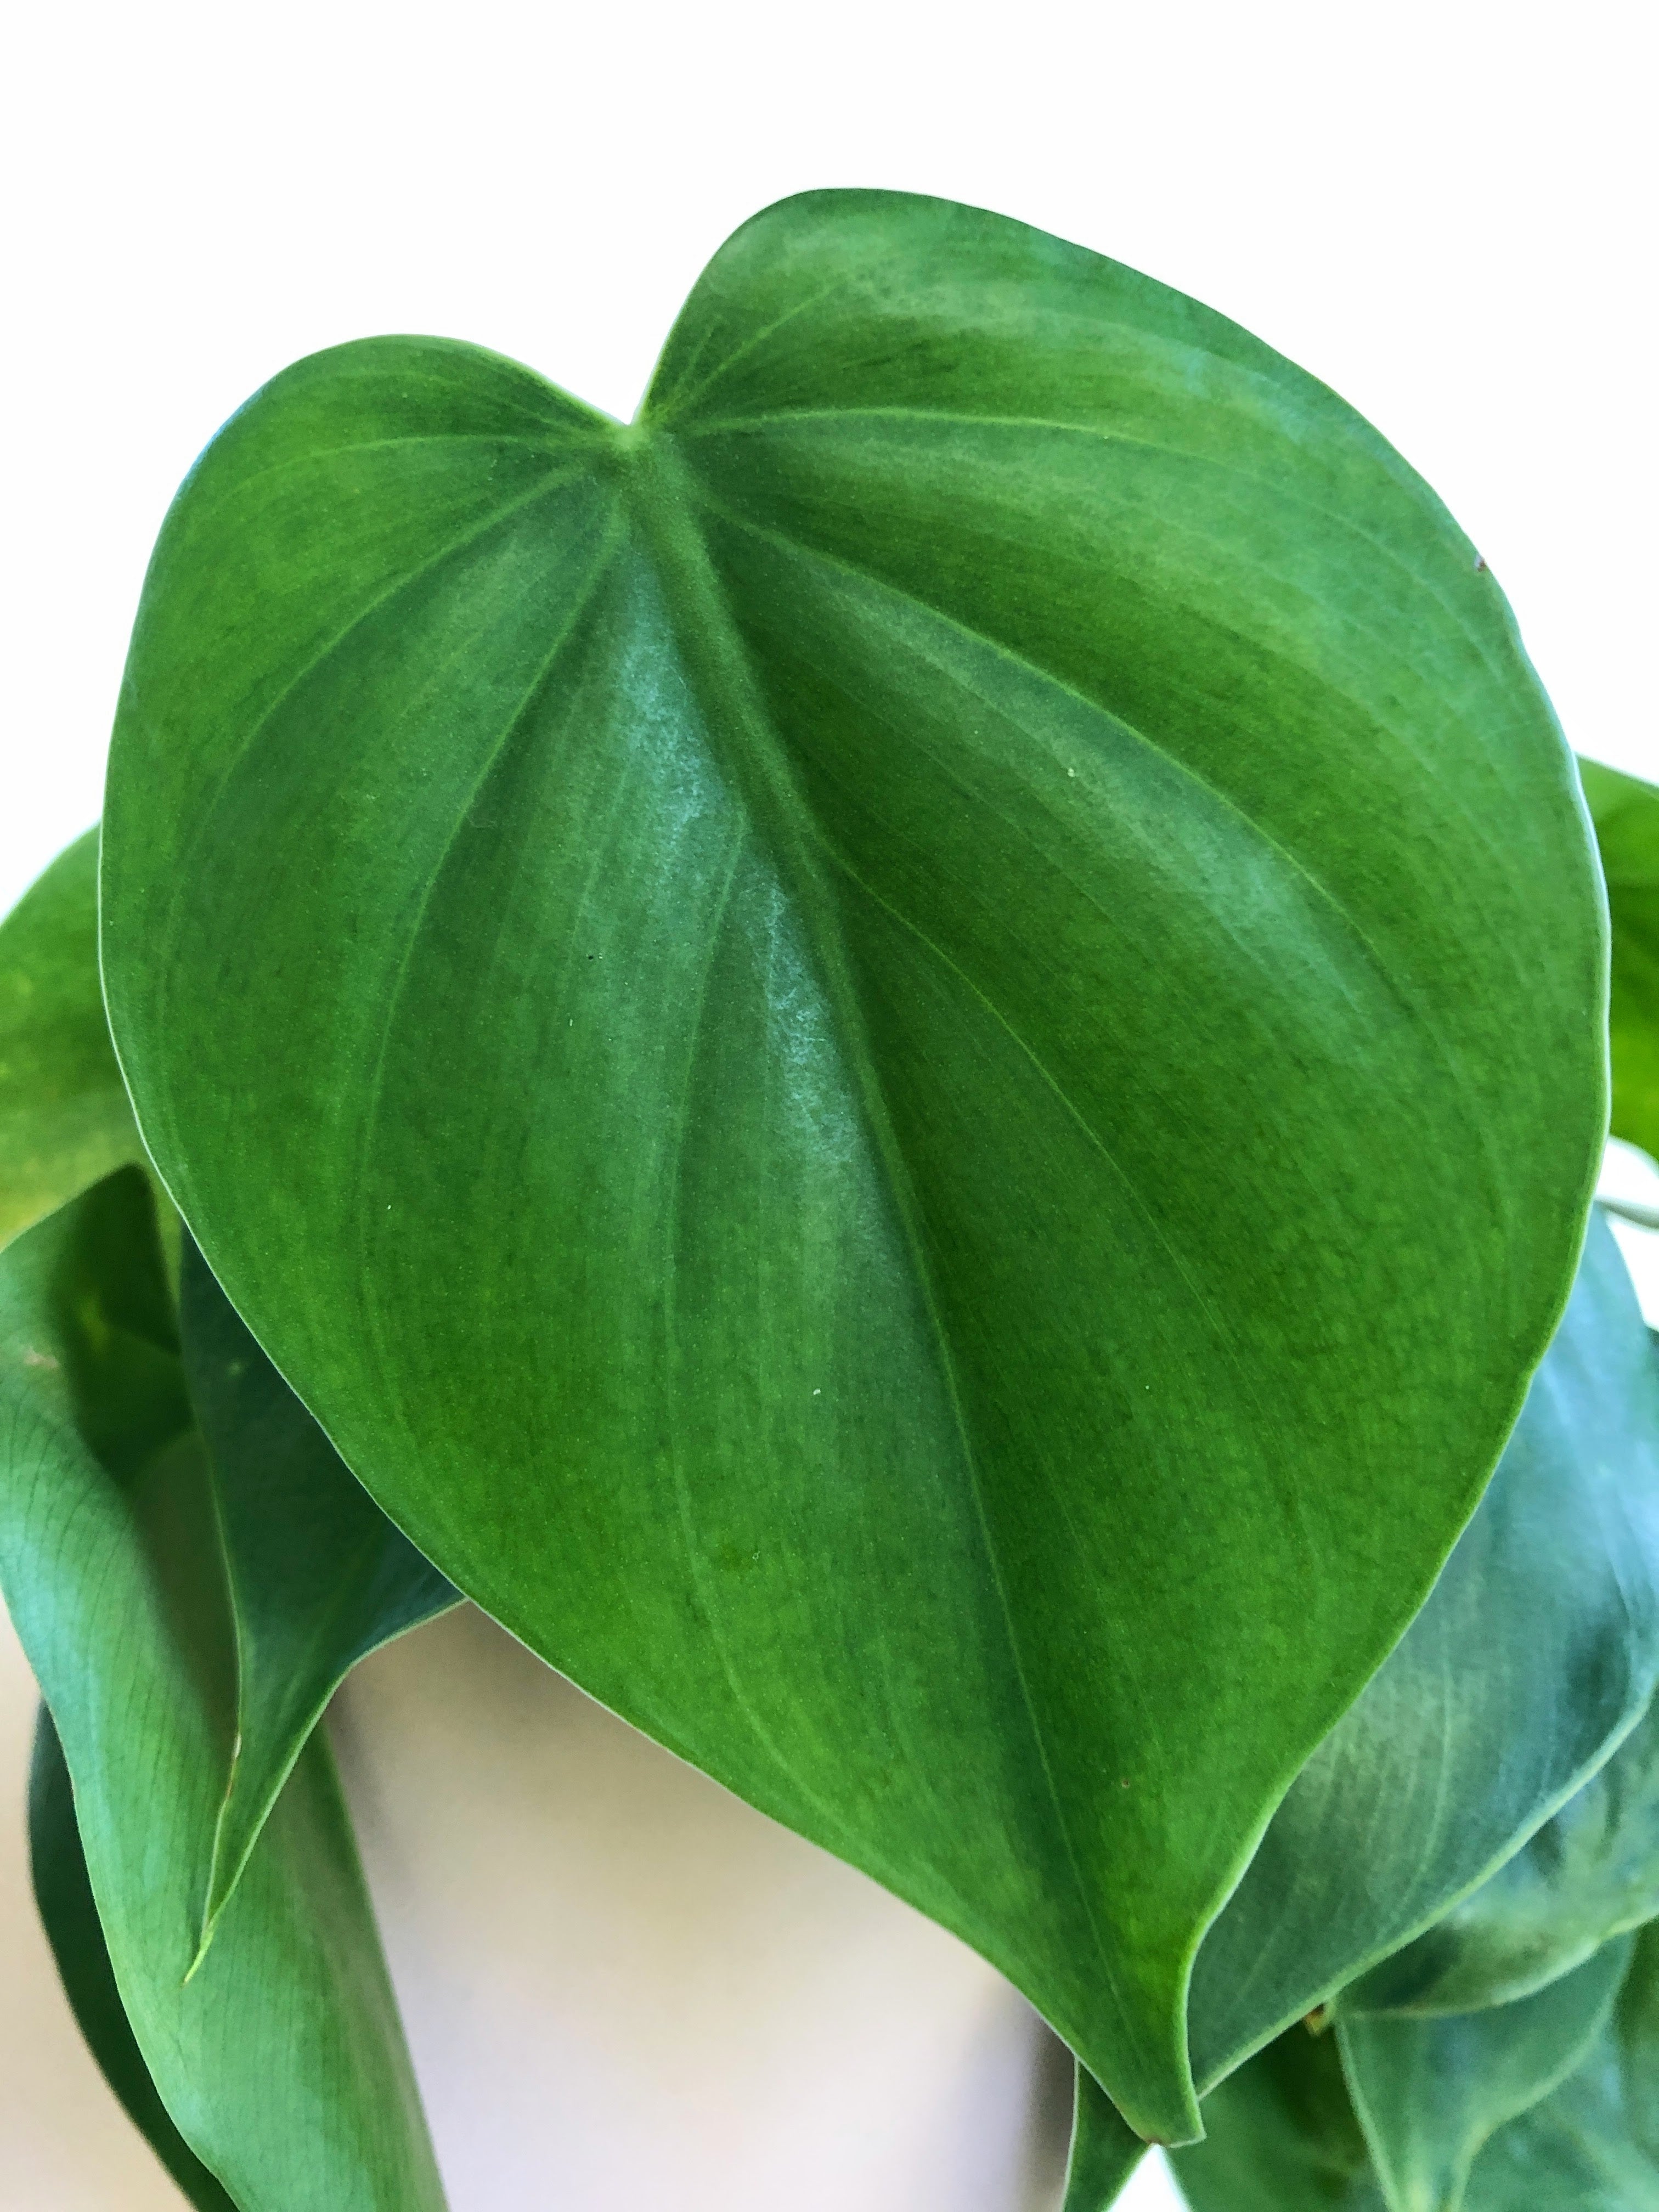 Philodendron Cordatum "Heart-Leaf Philodendron"